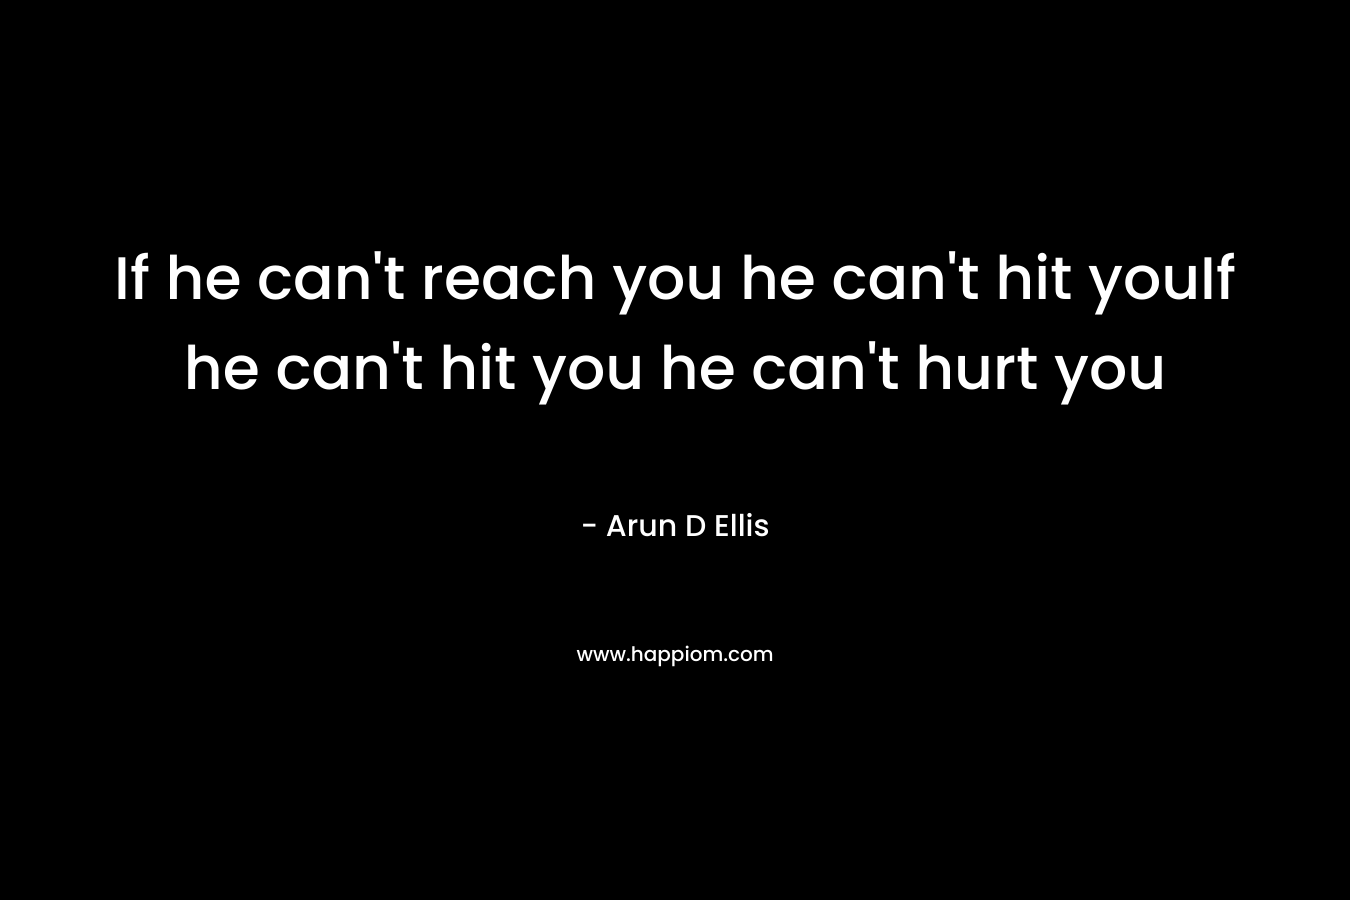 If he can't reach you he can't hit youIf he can't hit you he can't hurt you